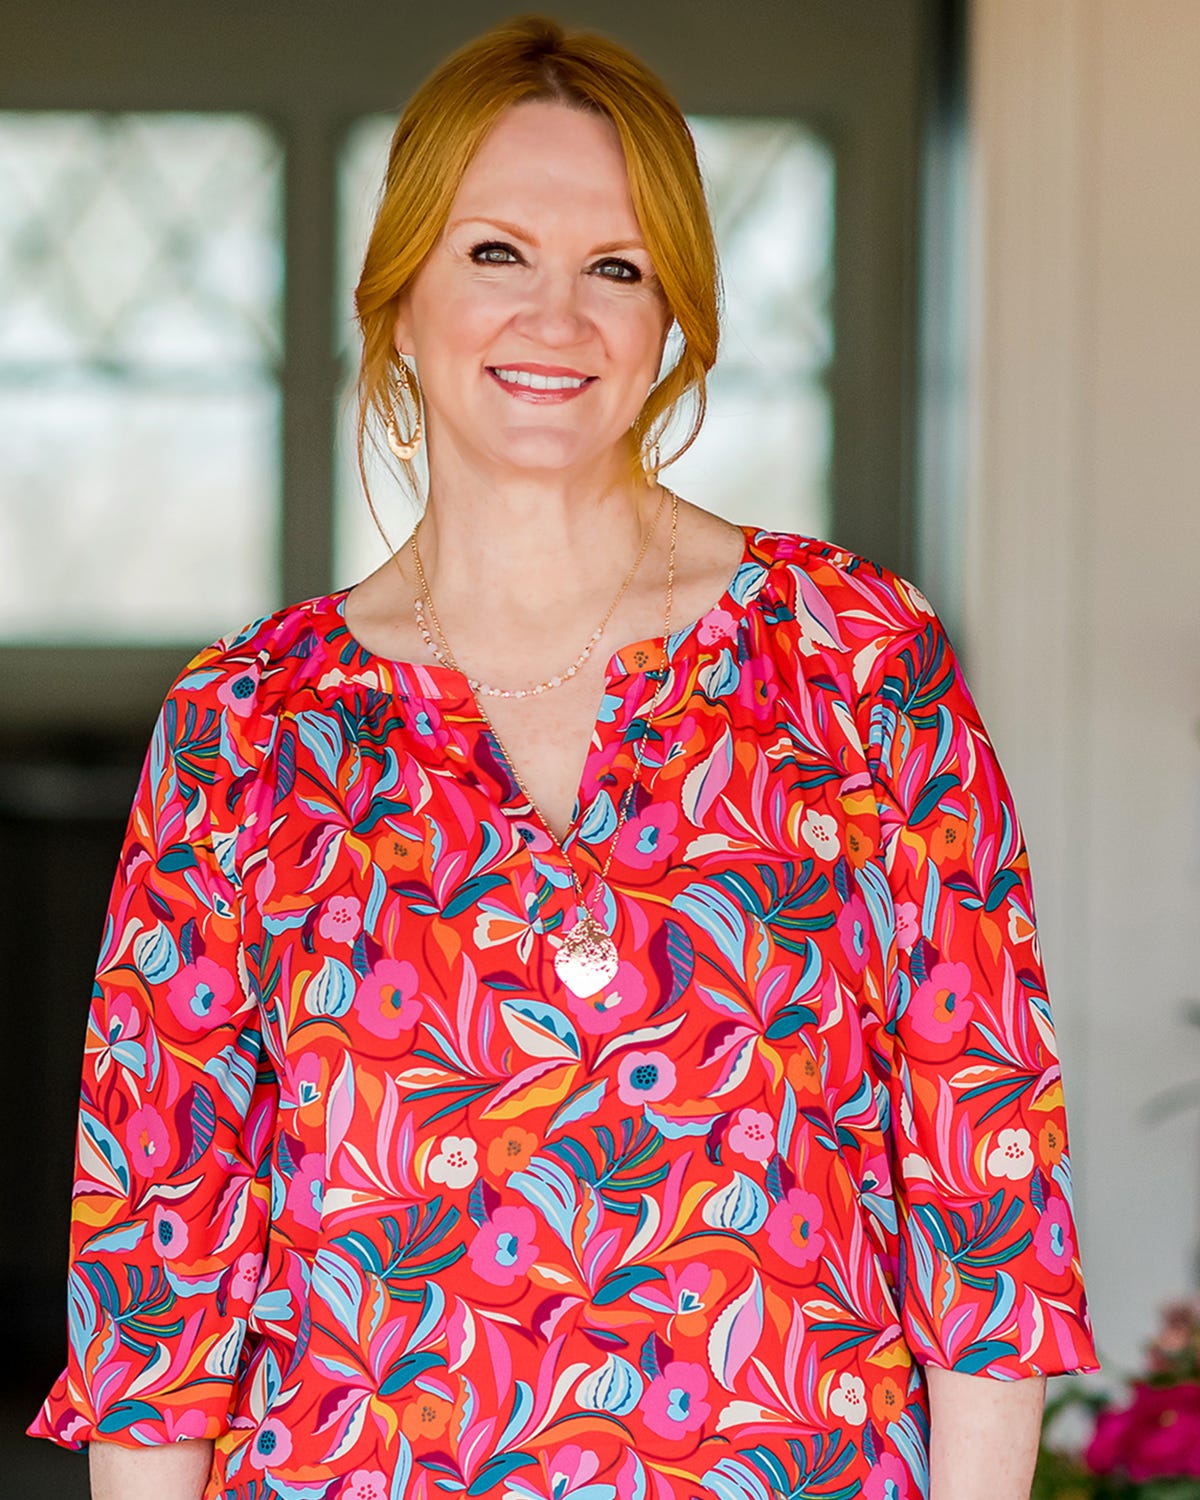 There's a Major Sale on Ree Drummond's Dresses Starting at Just $7